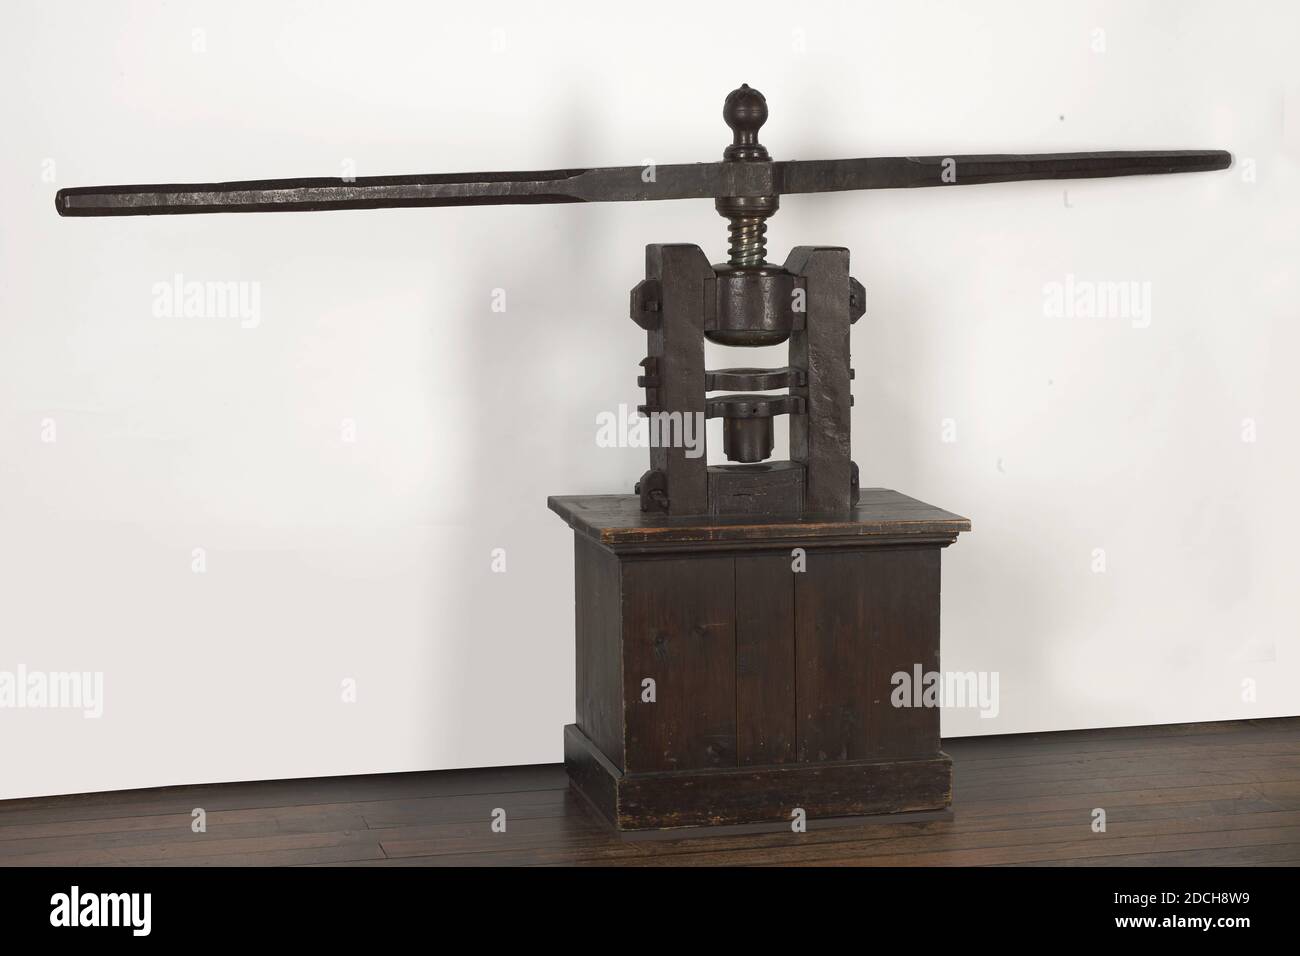 screw press, Anonymous, 18th century, wood, iron, brass, painted, Iron screw press with a brass bush and turning rod, used to stamp or print the sheet. The press stands on a brown-painted wooden base. The bud on top is decorated with leaves, General: 130 × 250 × 43.5cm, 1300 × 2500 × 435mm Stock Photo